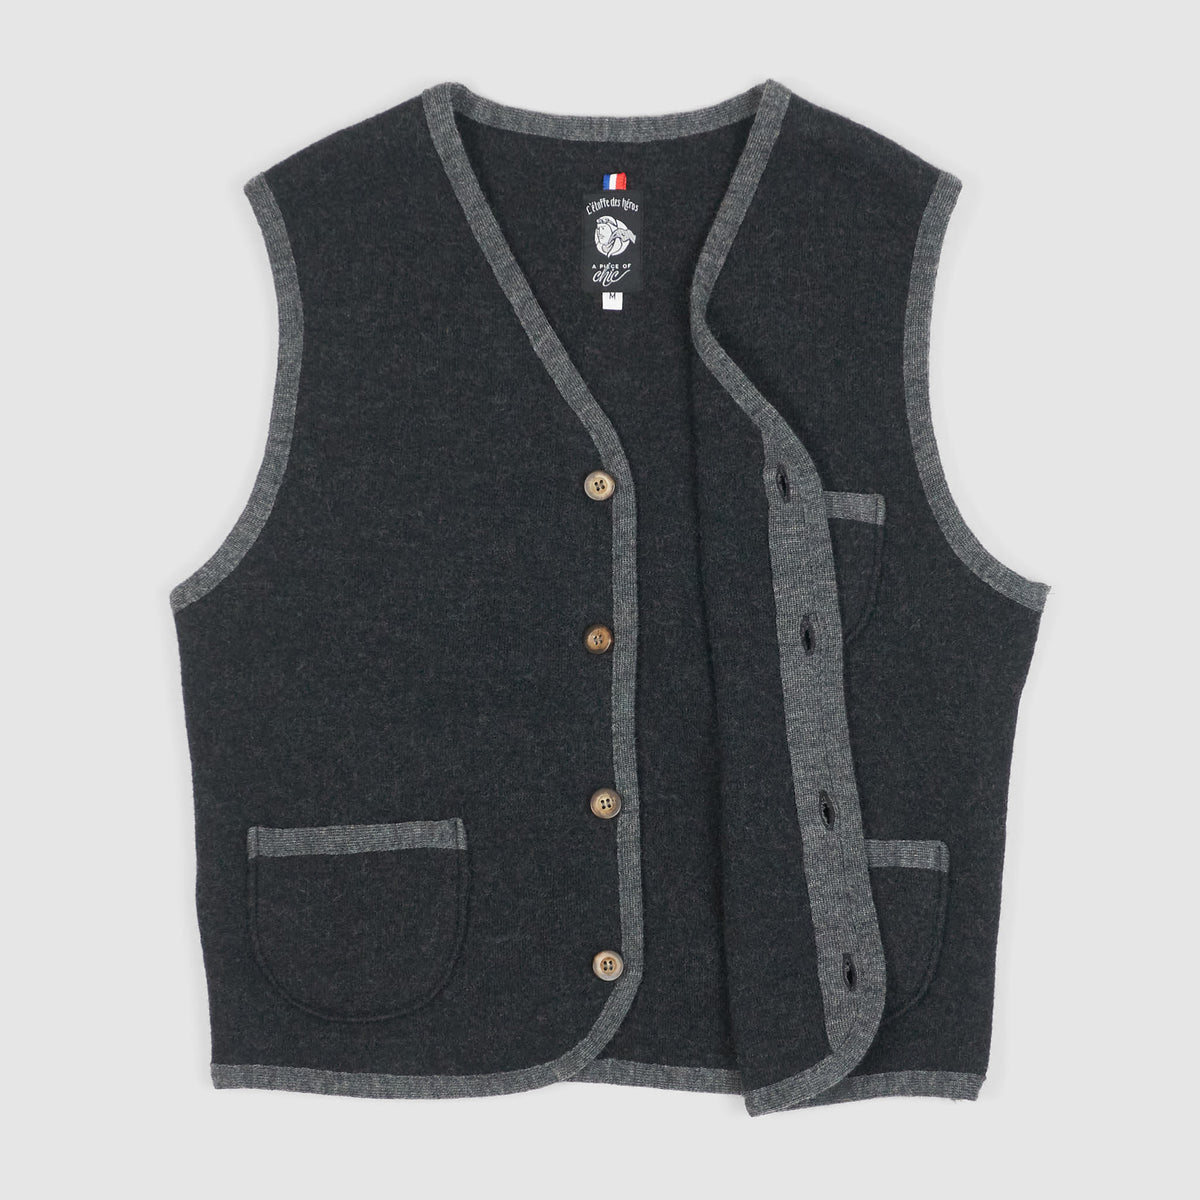 A Piece of Chic Black and Gray Wool Vest